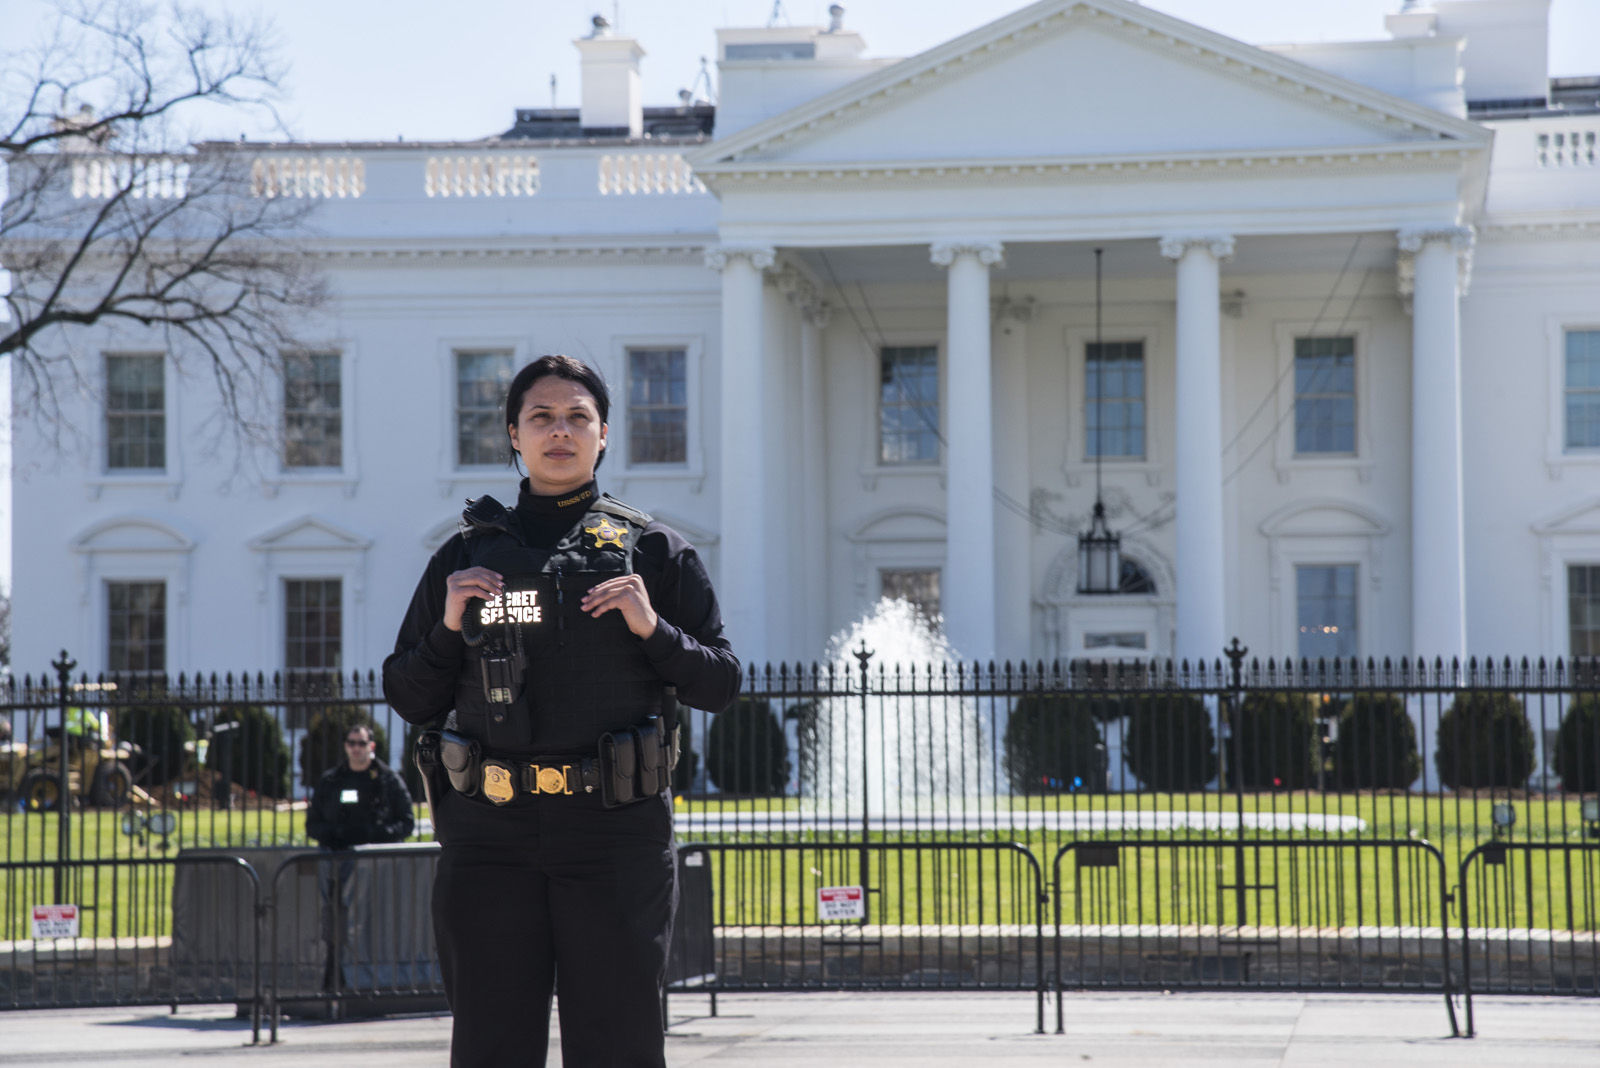 Members of our Uniformed Division protect the White House and grounds and much more.